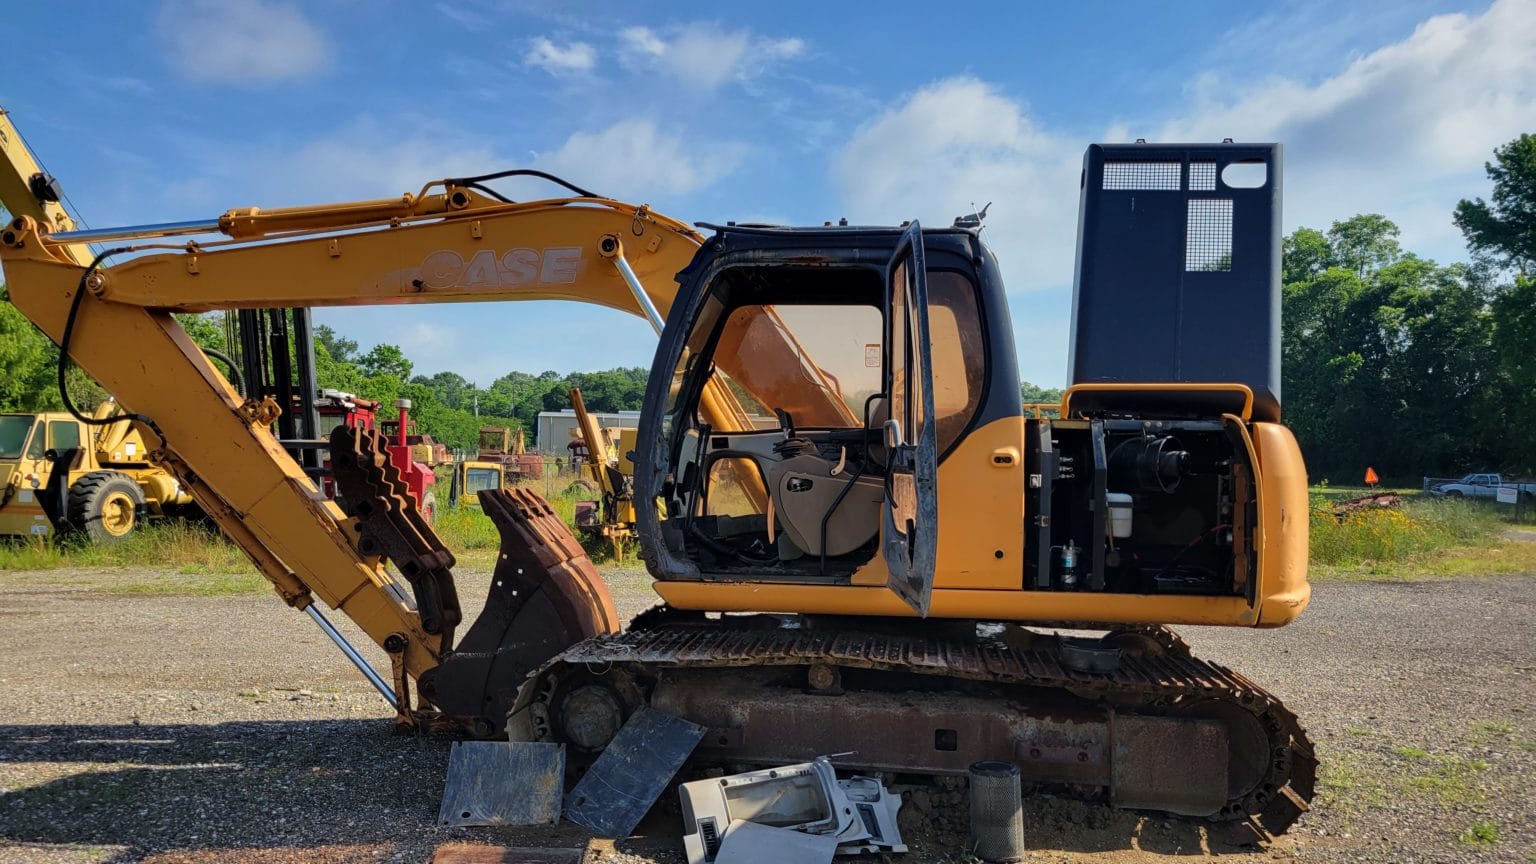 case excavator for salvage with open access doors at gulf south equipment sales baton rouge louisiana